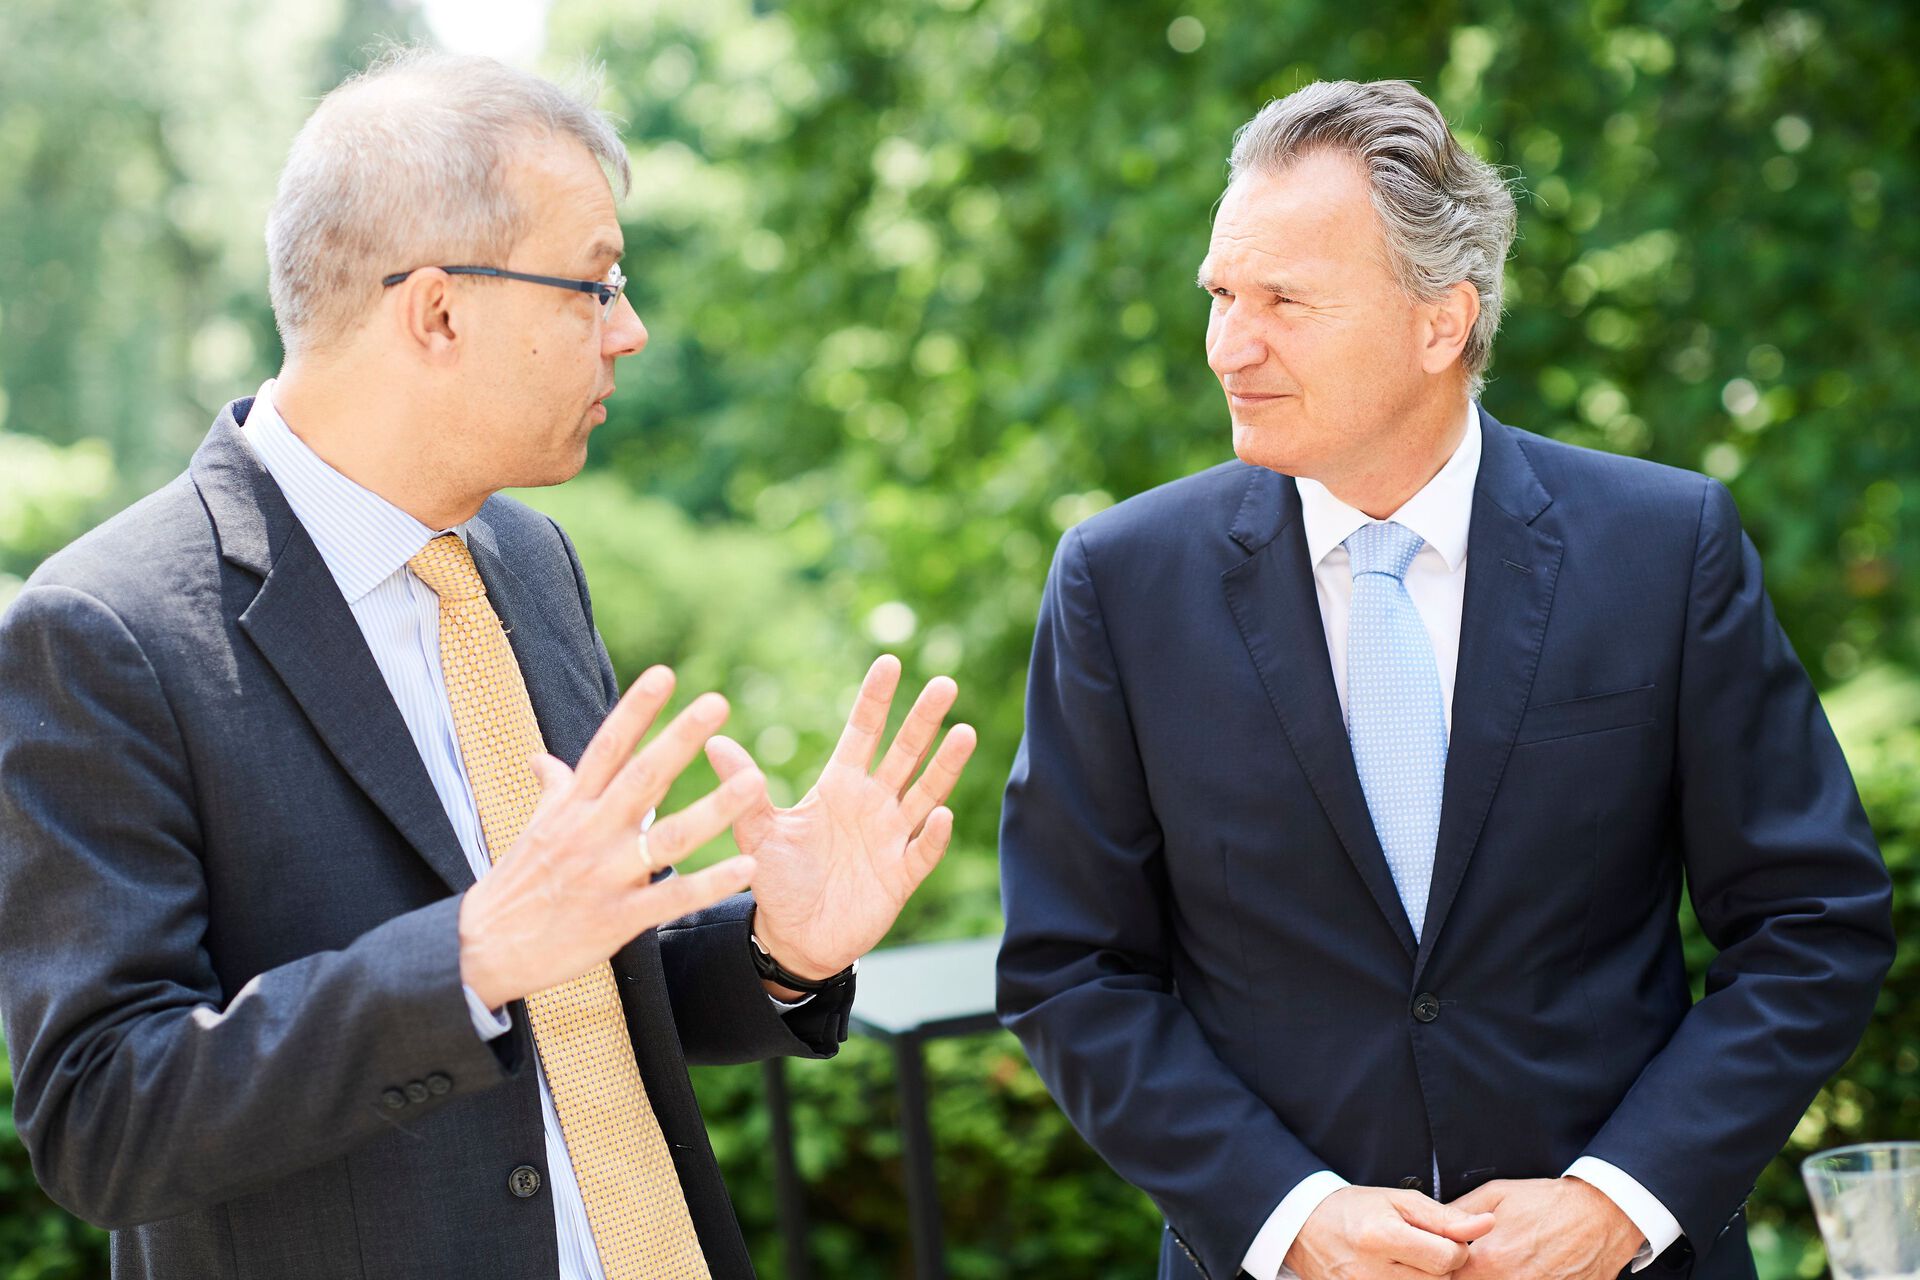 Jan Palmowski (Secretary-General of The Guild) and Robert-Jan Smits (Director-General for Research and Innovation) /Photographed by F. de Ribaucourt